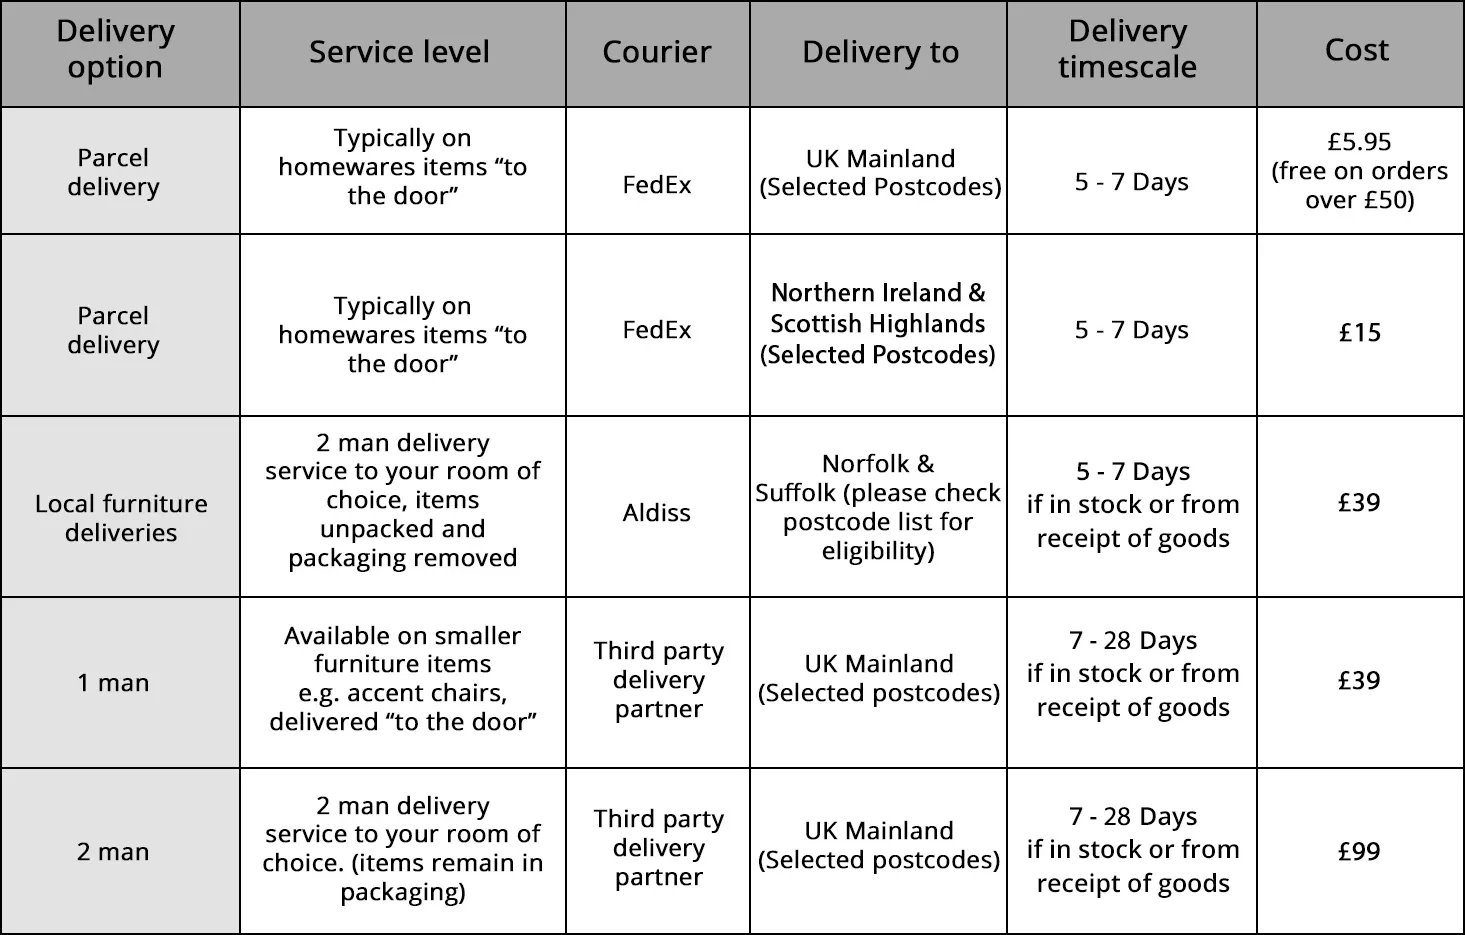 delivery options